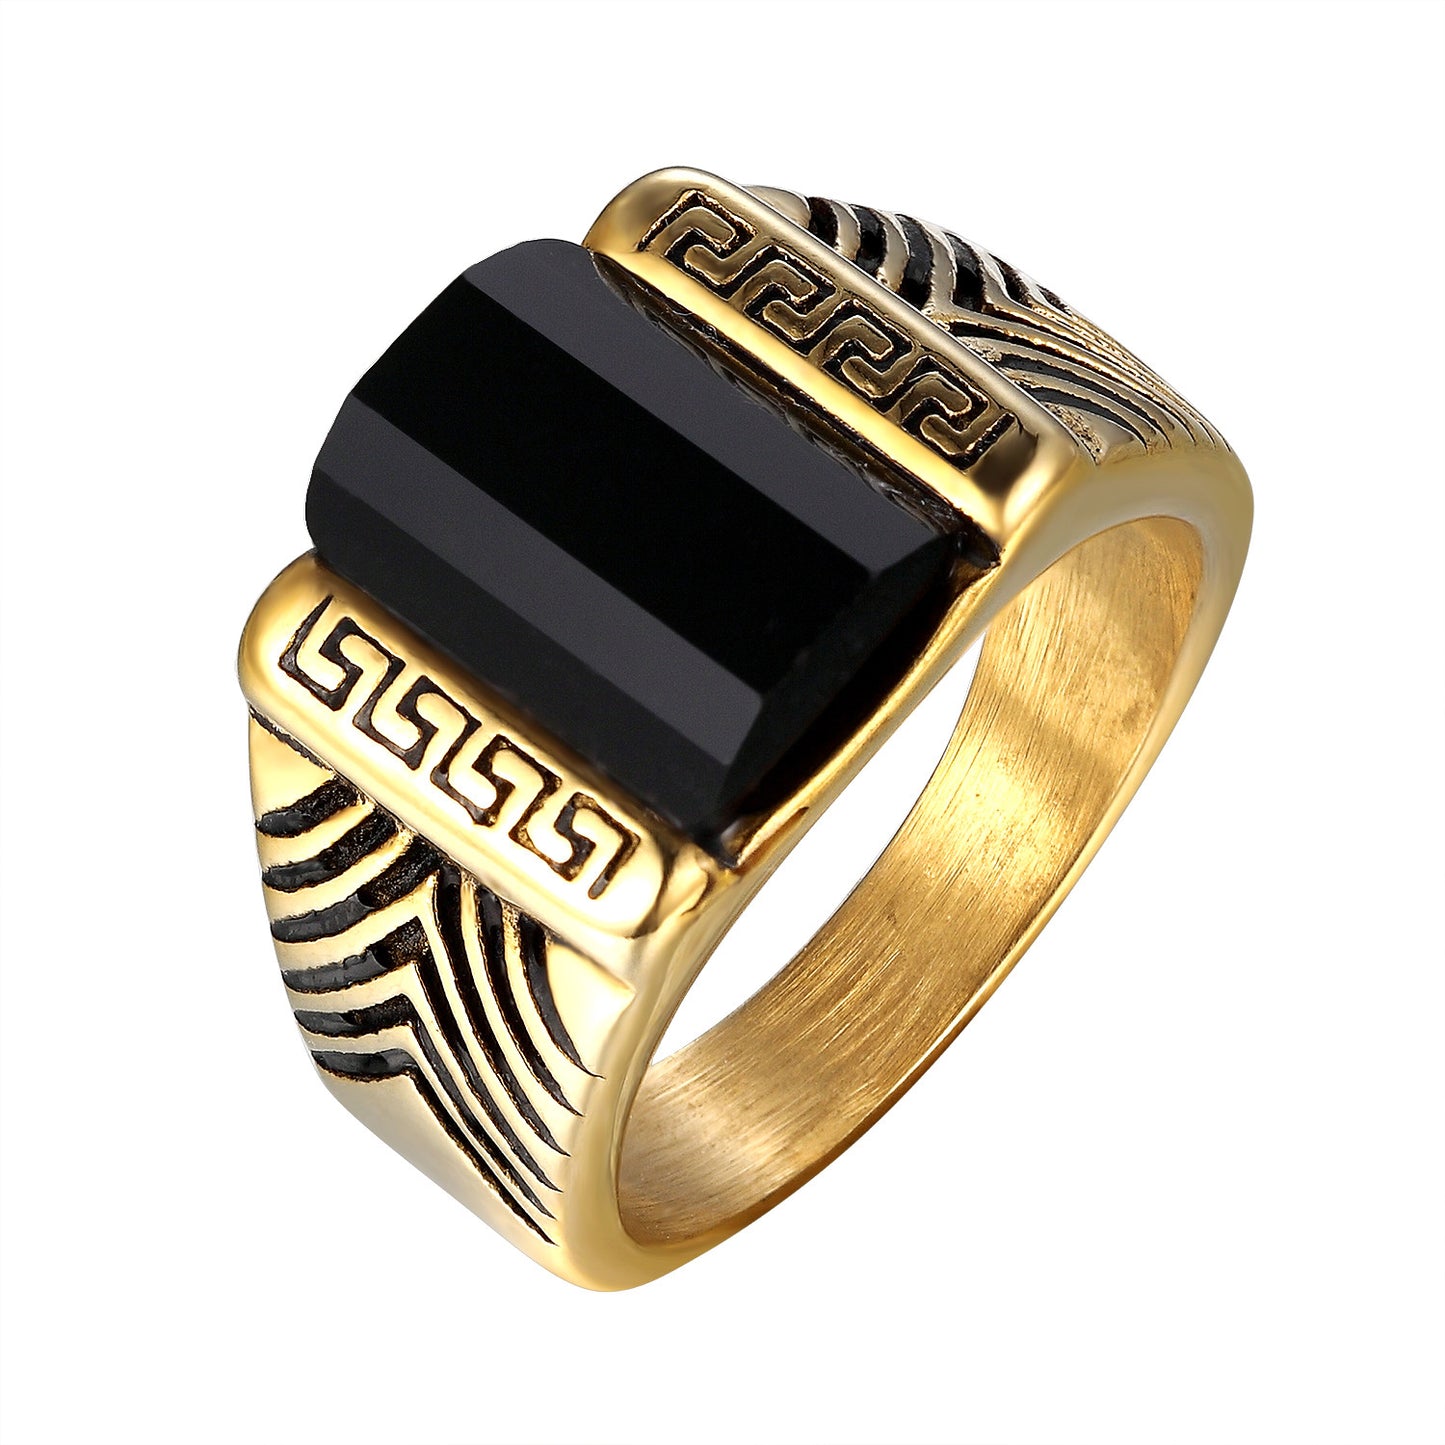 Stainless Steel Mens Ring Greek Design Black Solitaire Stone